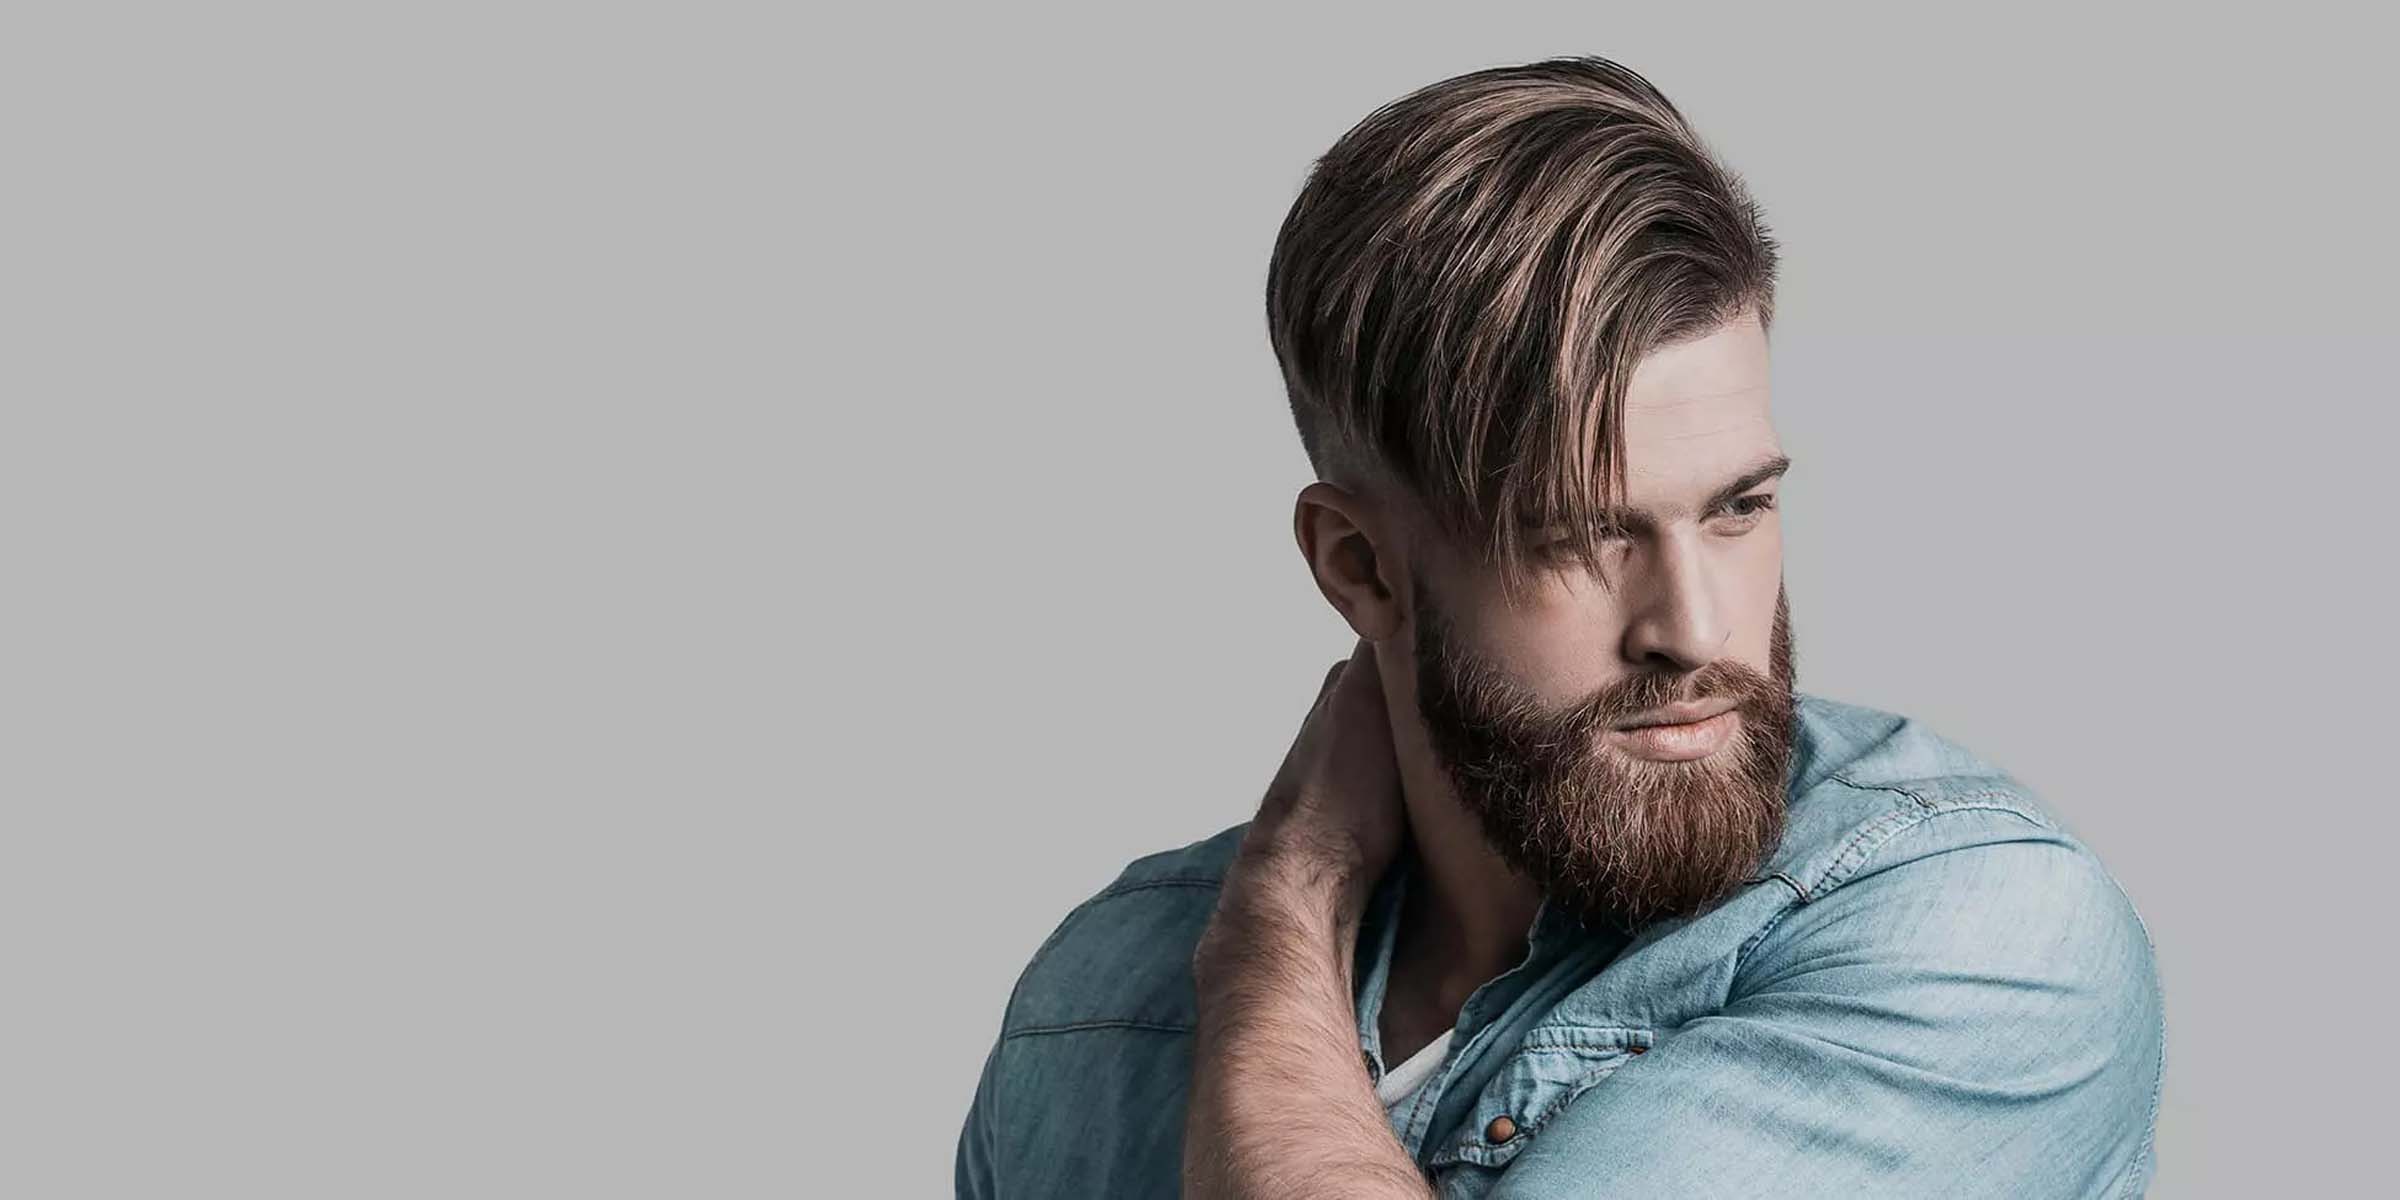 25+ Hairstyles For Young Men (Cool + Stylish)